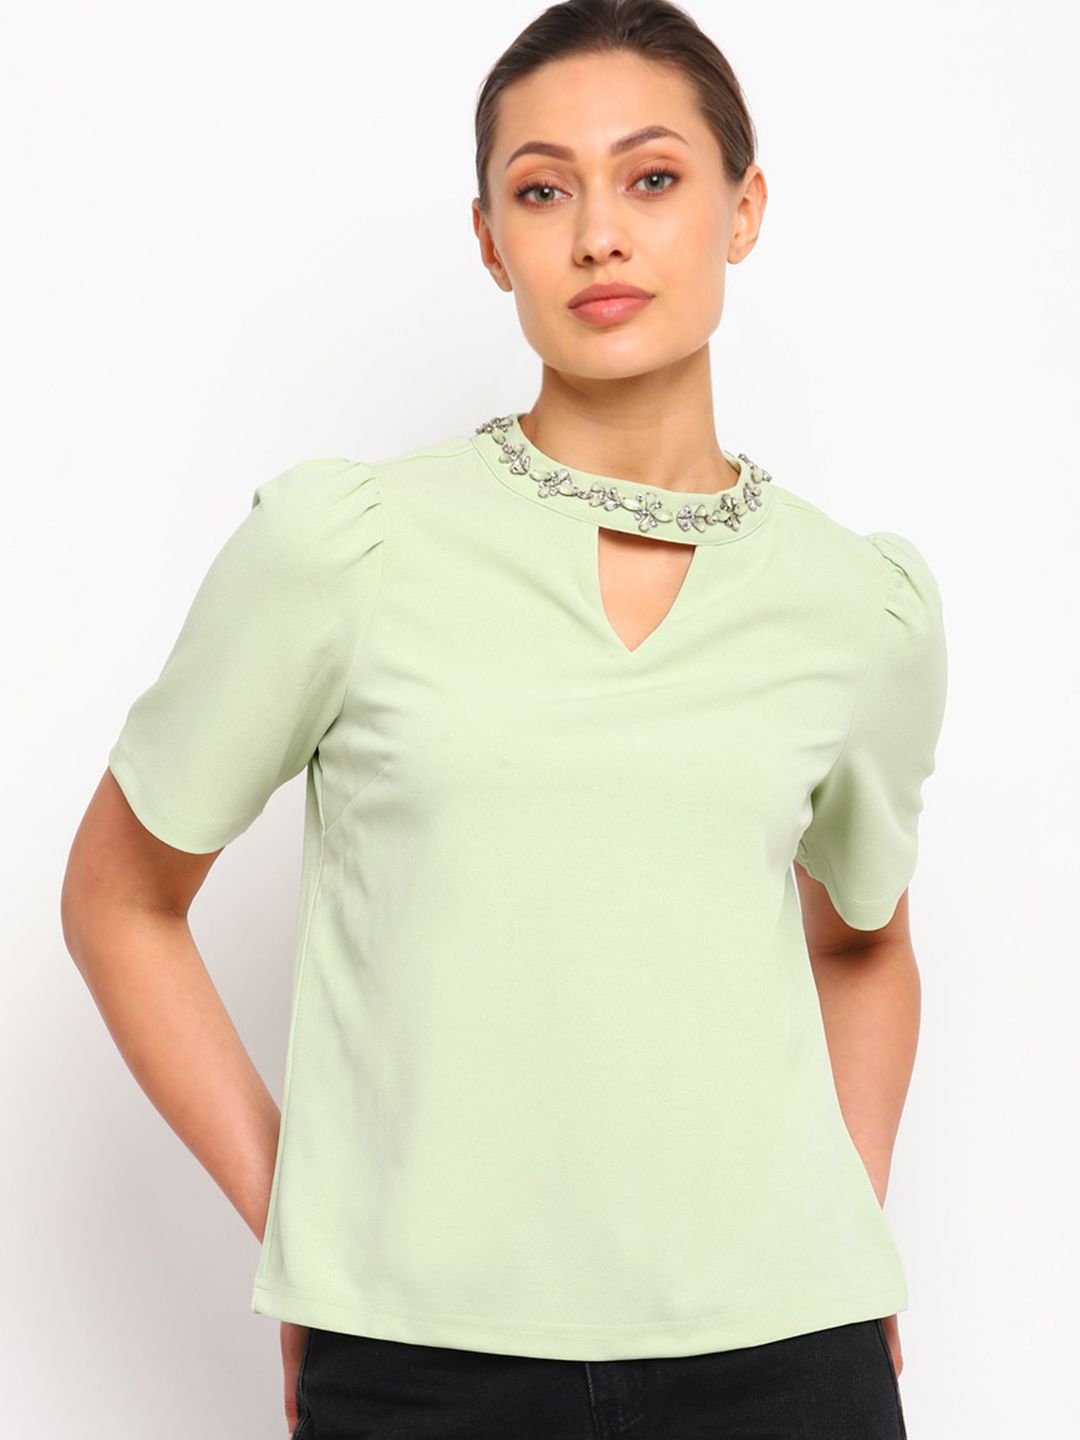 COVER STORY Jewel Neck Top Price in India